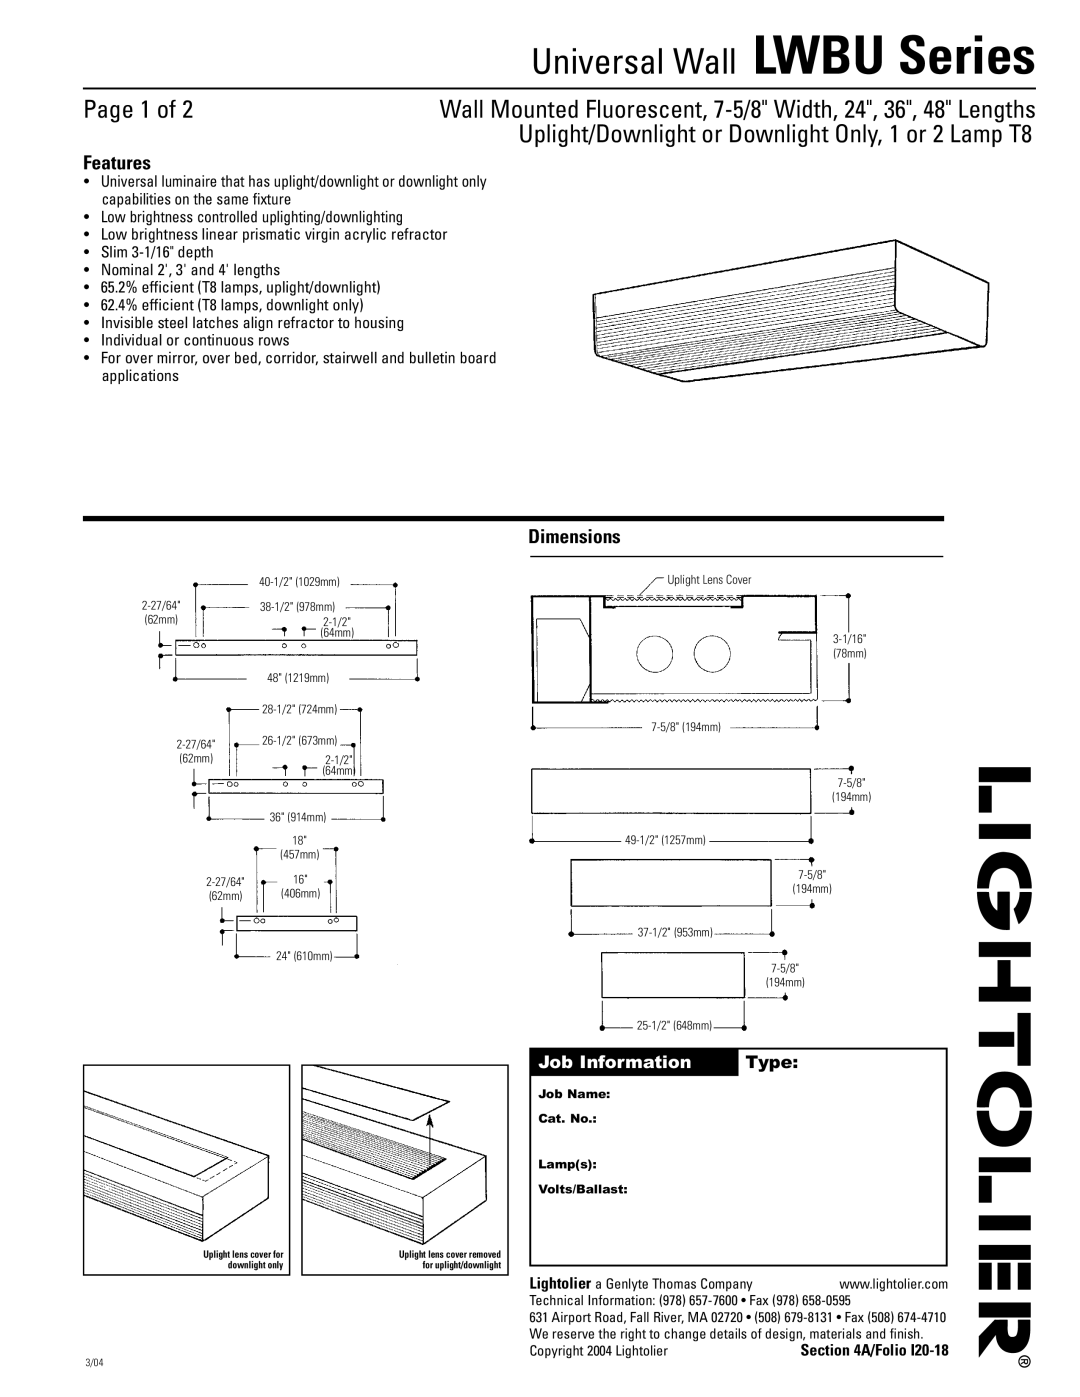 Lightolier dimensions Universal Wall LWBU Series, Page 1 of, Features, Dimensions, Job Information, Type 